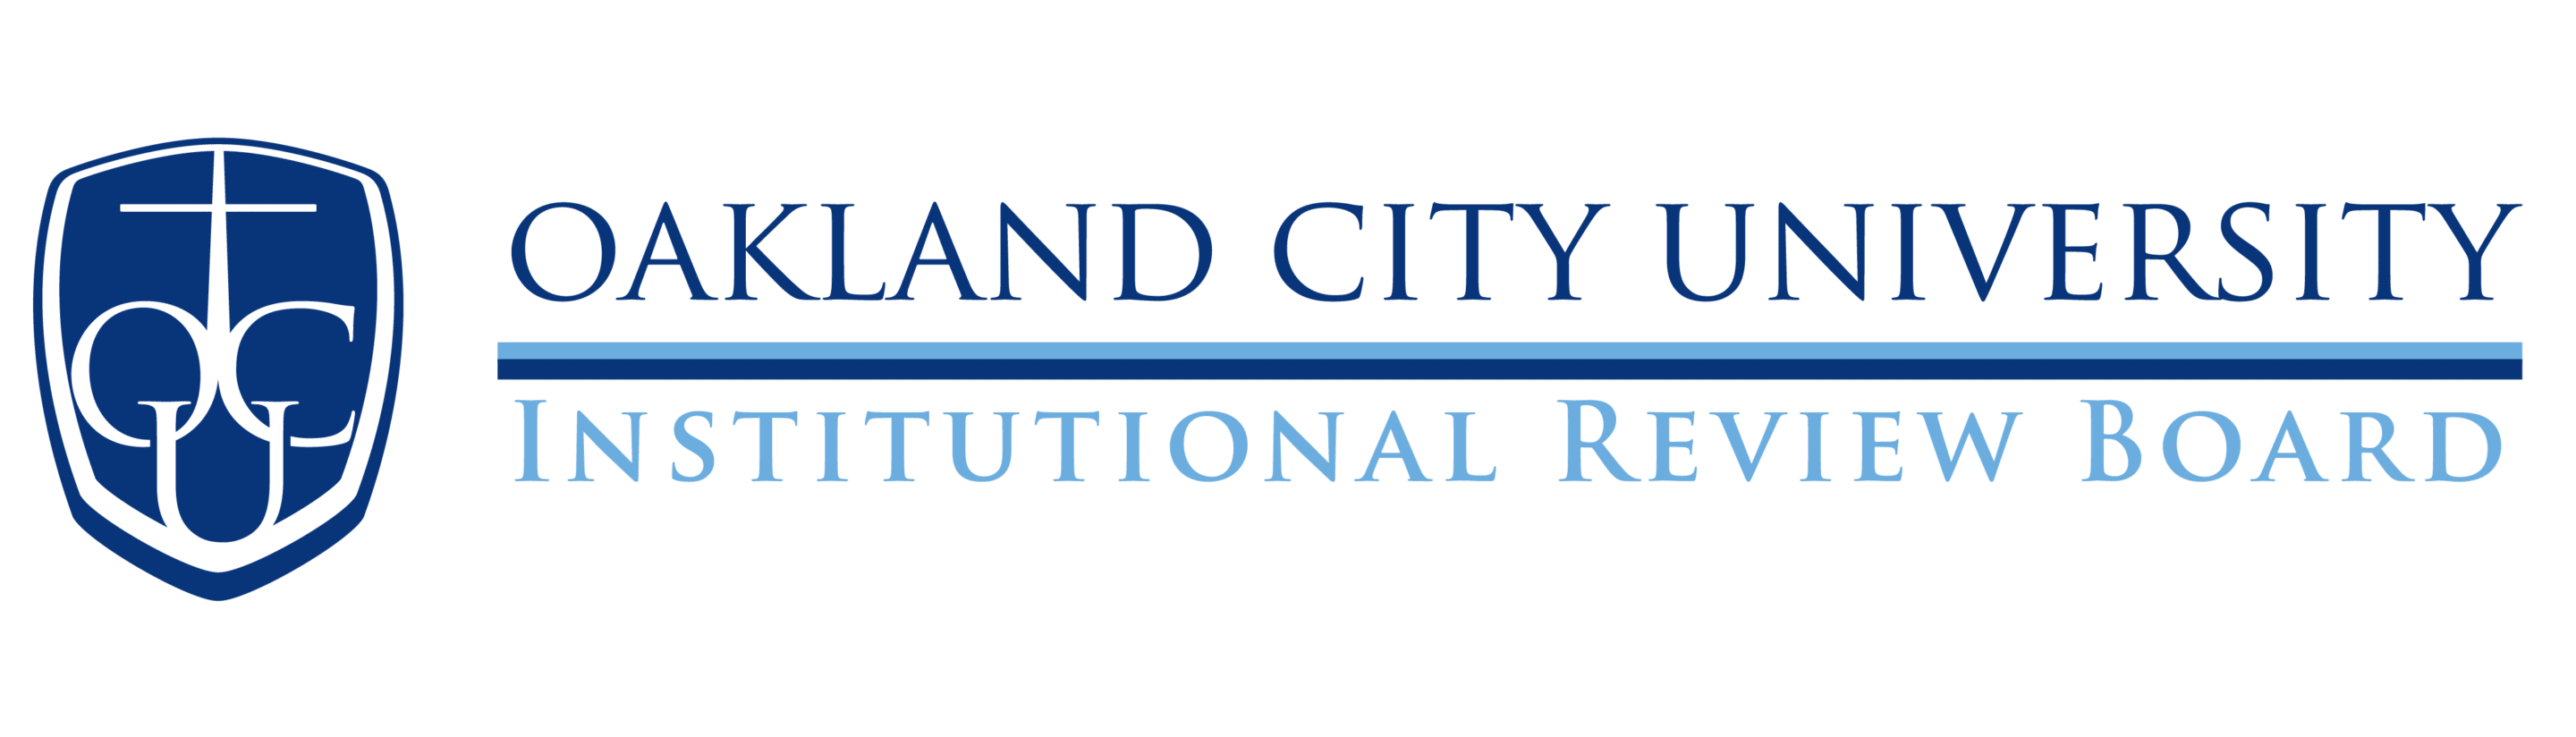 Institutional Review Board logo